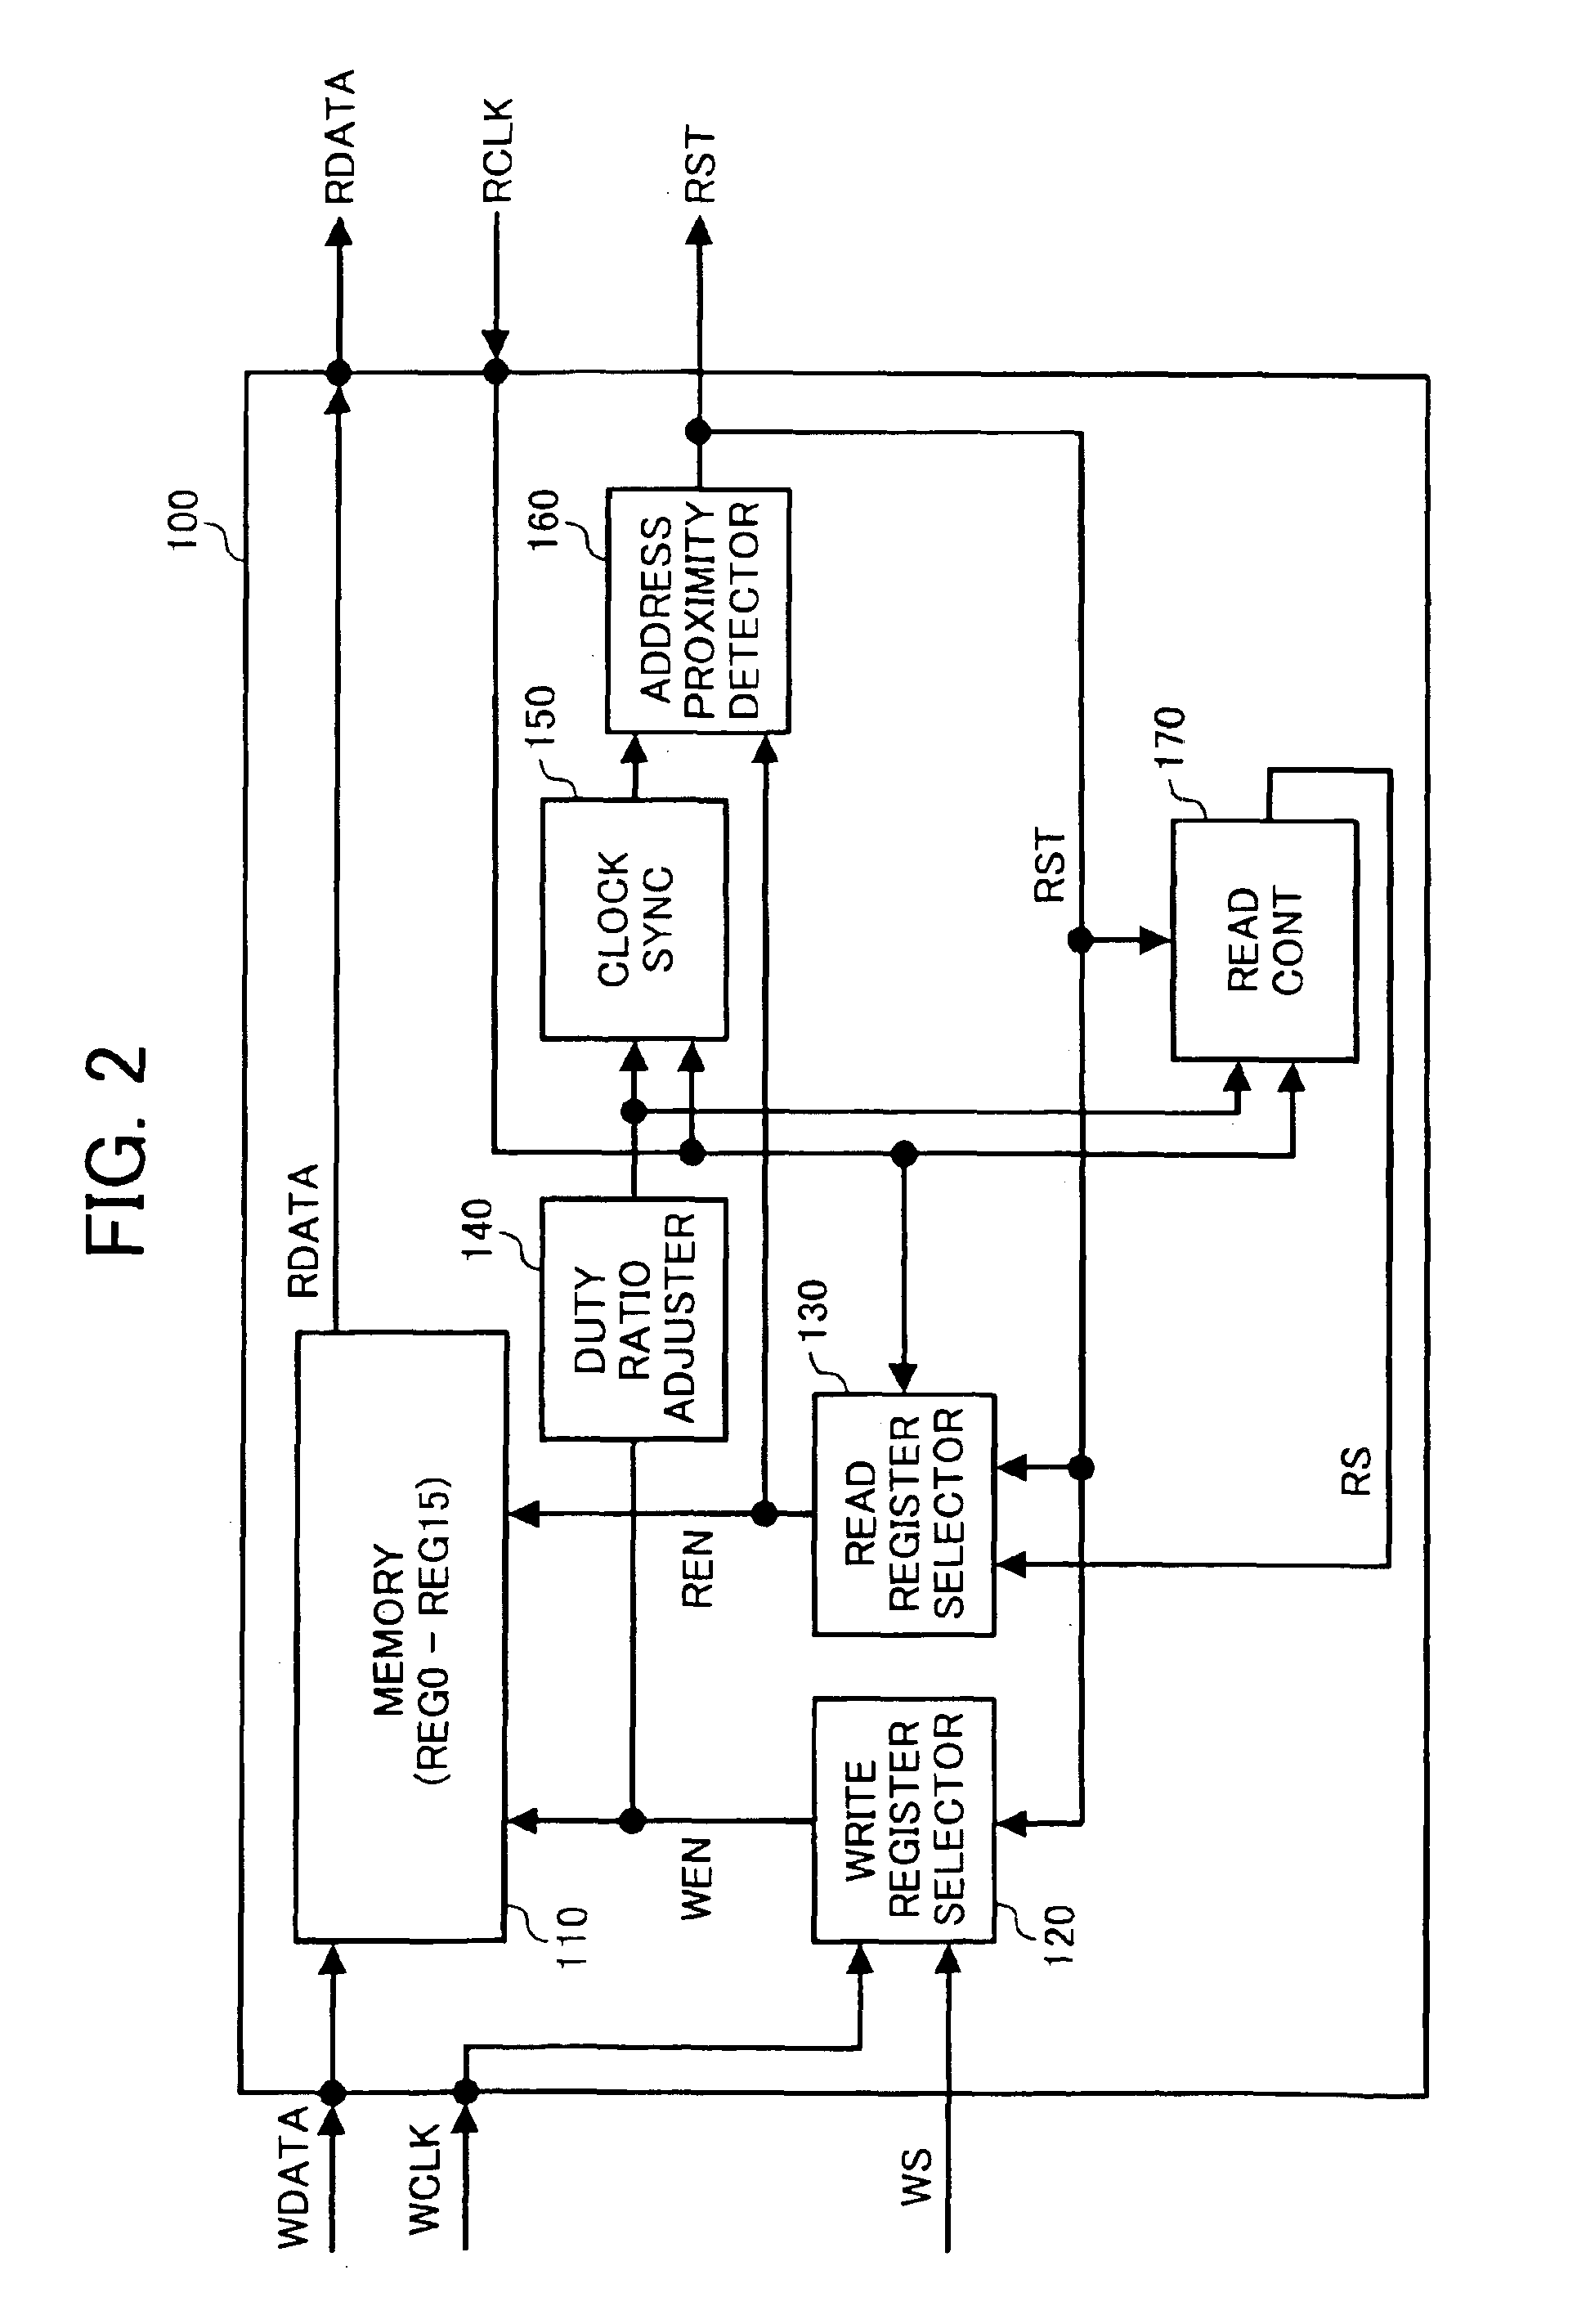 Method and circuit for elastic storing capable of adapting to high-speed data communications